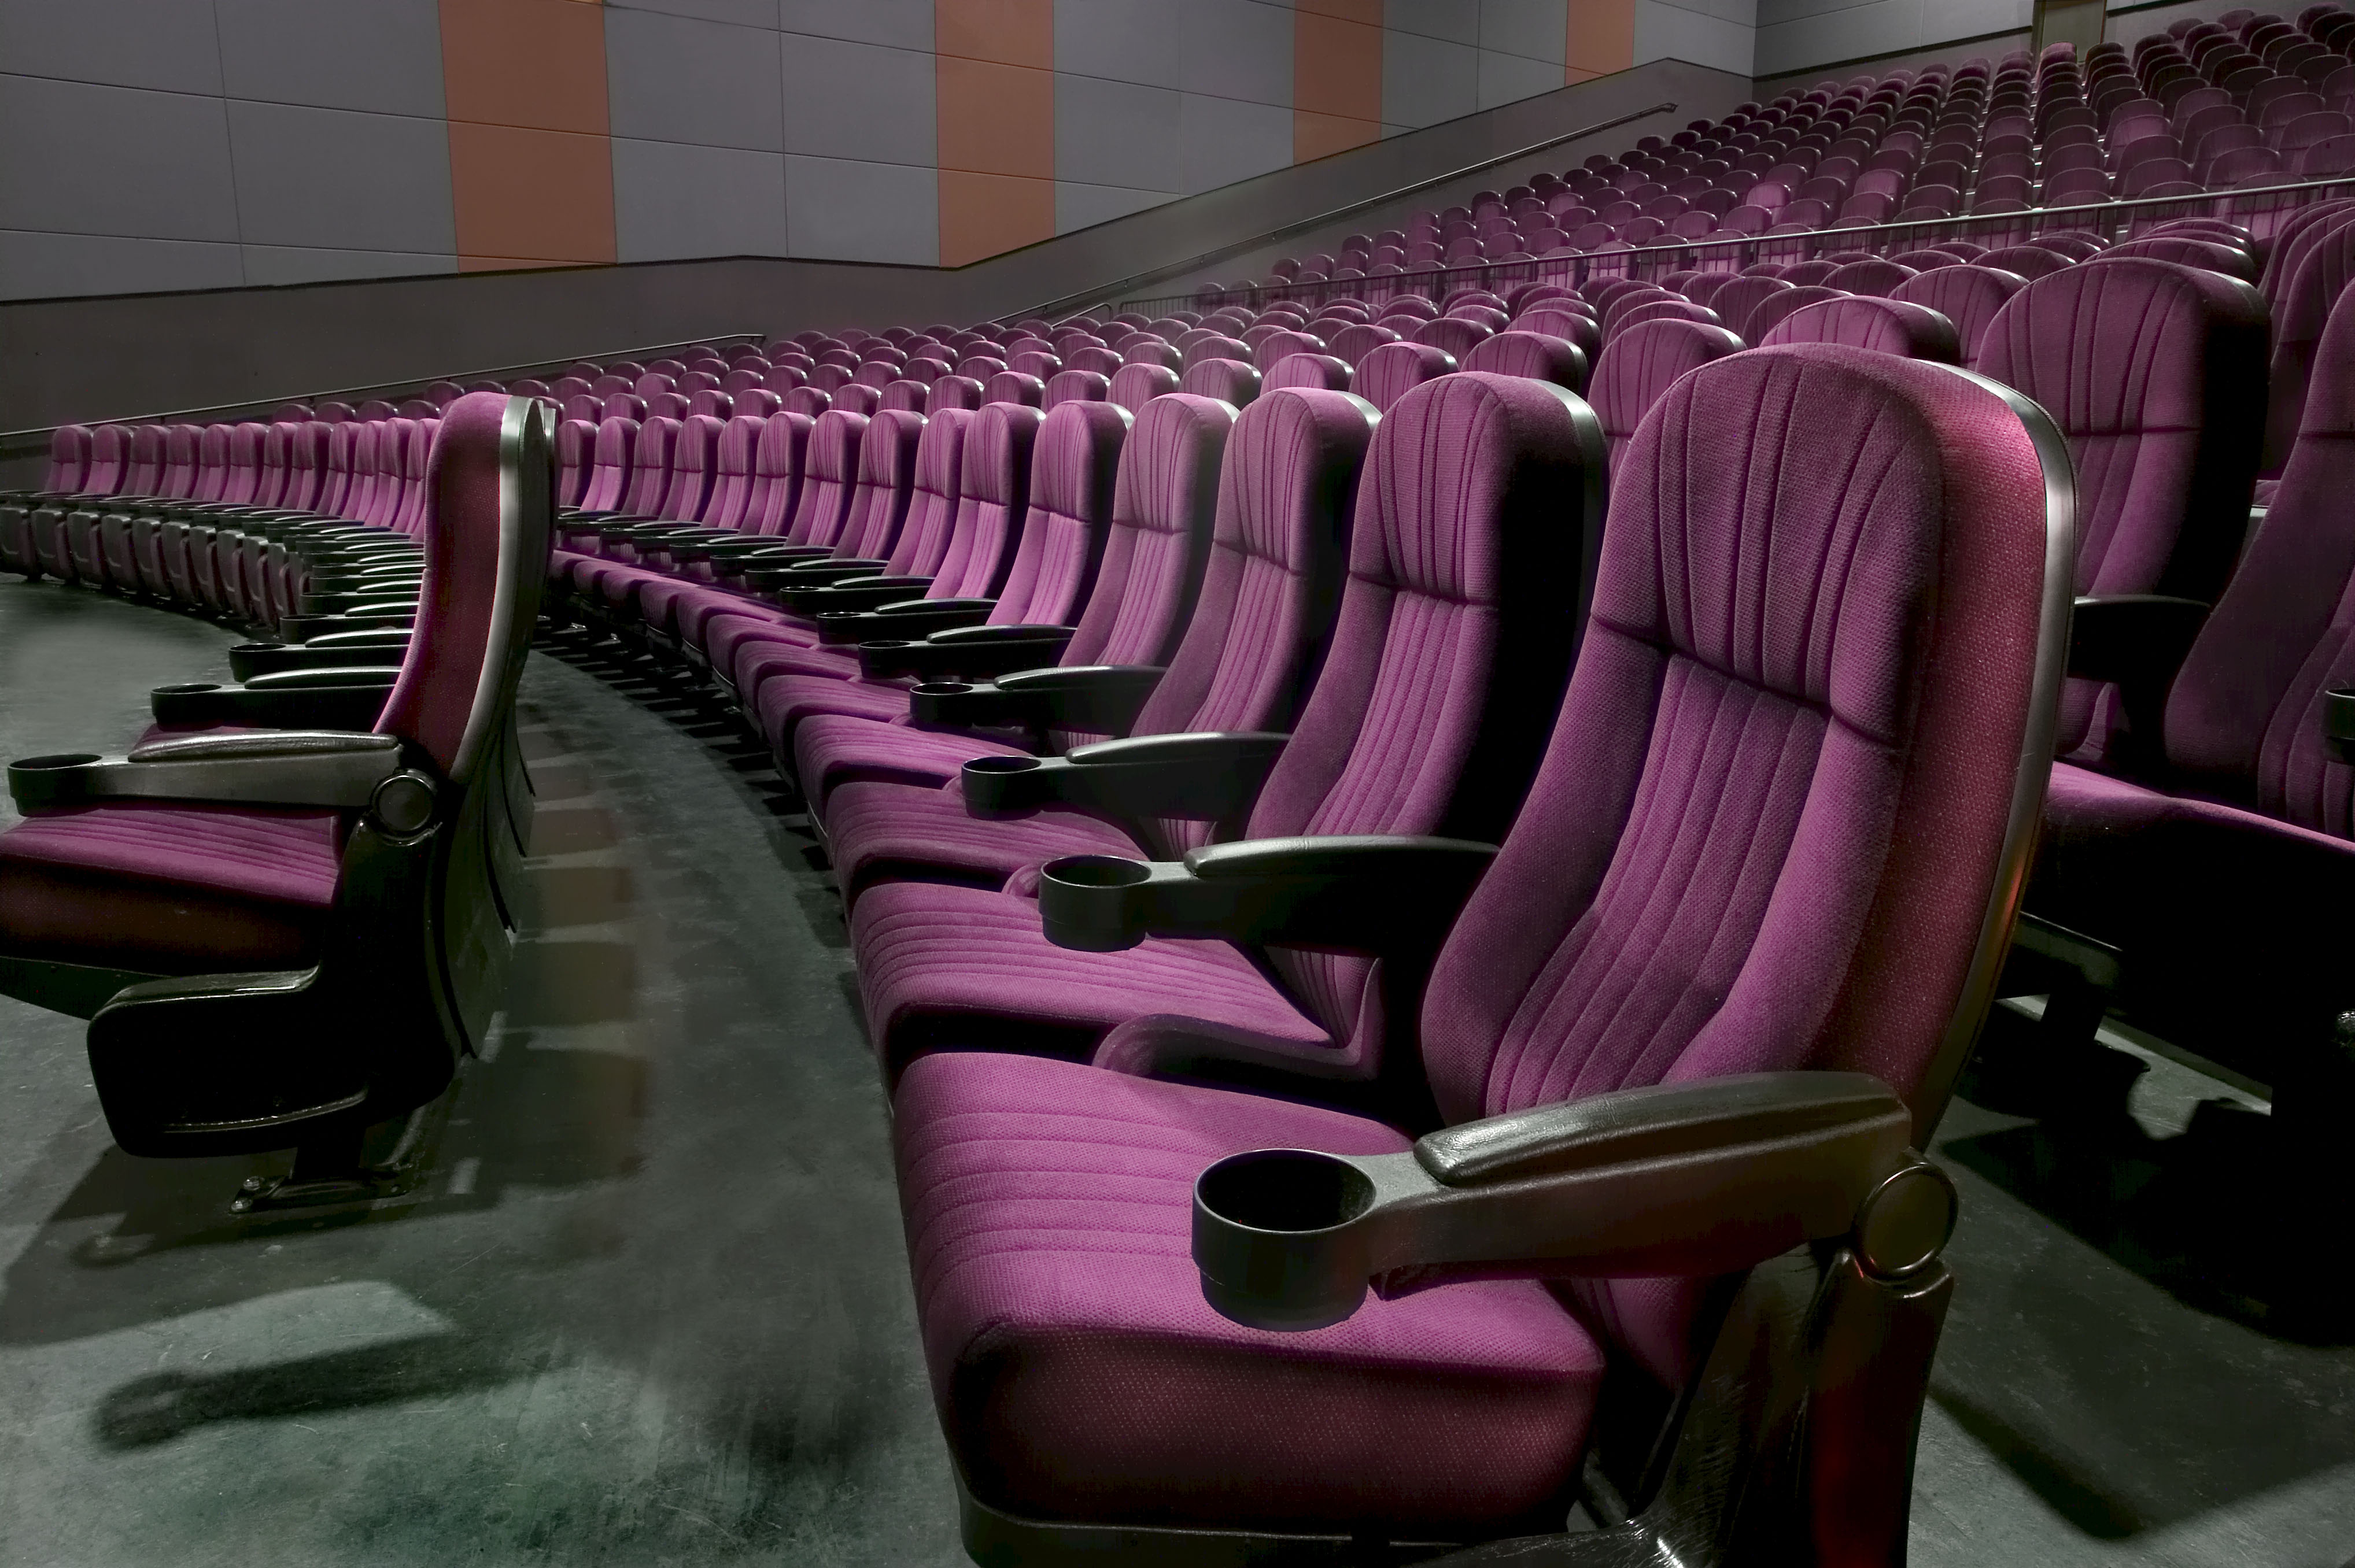 non reserved seating movie theaters